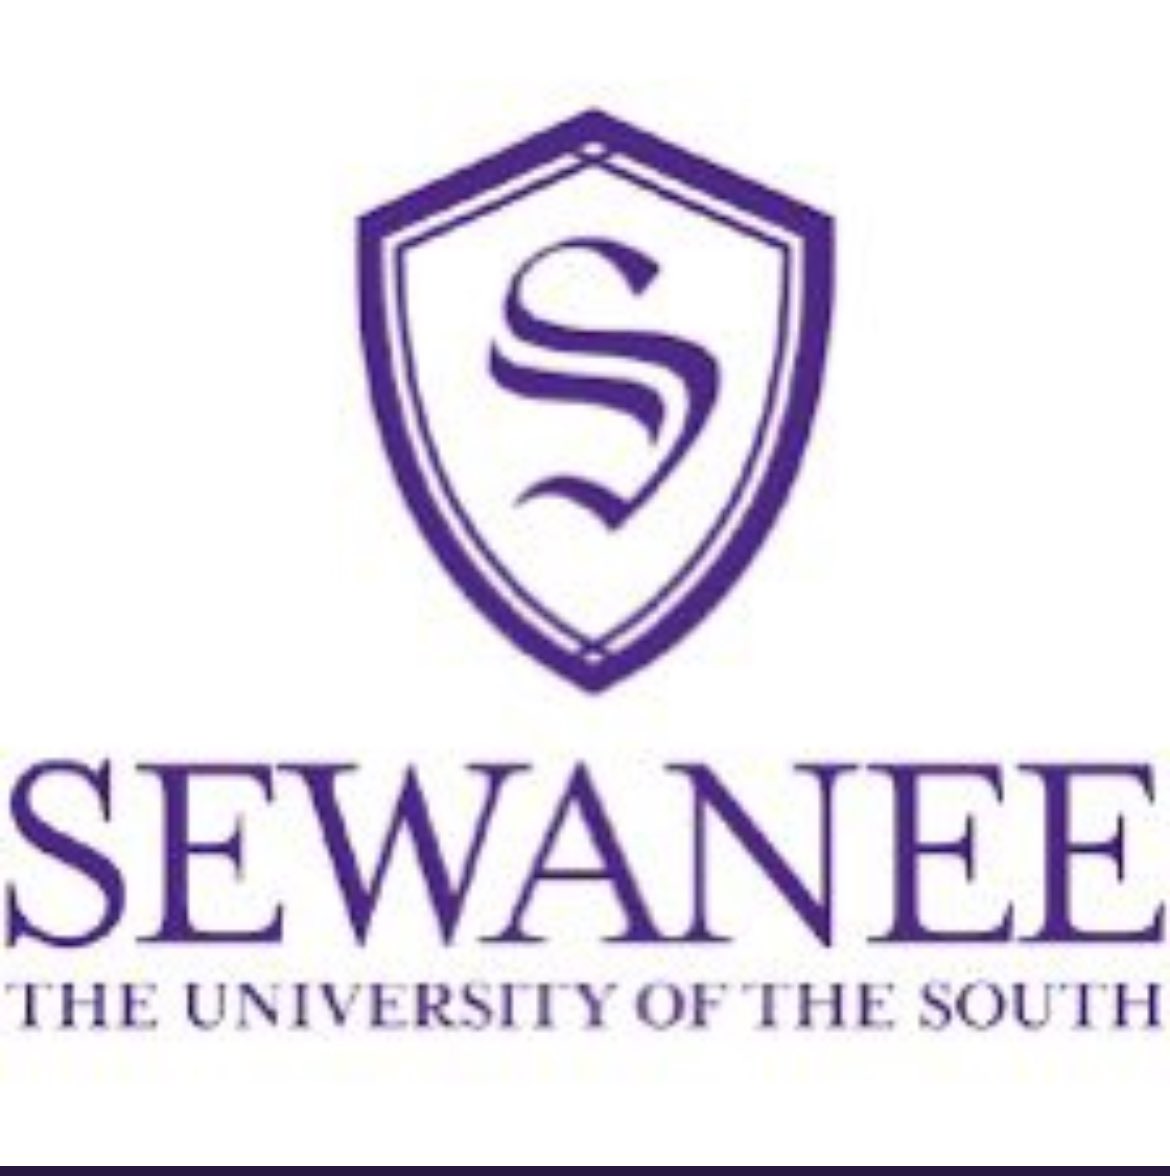 After a great meet with @Official_CoachA I am truly blessed to receive an offer from Sewanee The university of the south!!🙏🏽🙏🏽 @MCHS_Fball @CoachTOsteen #gotigers